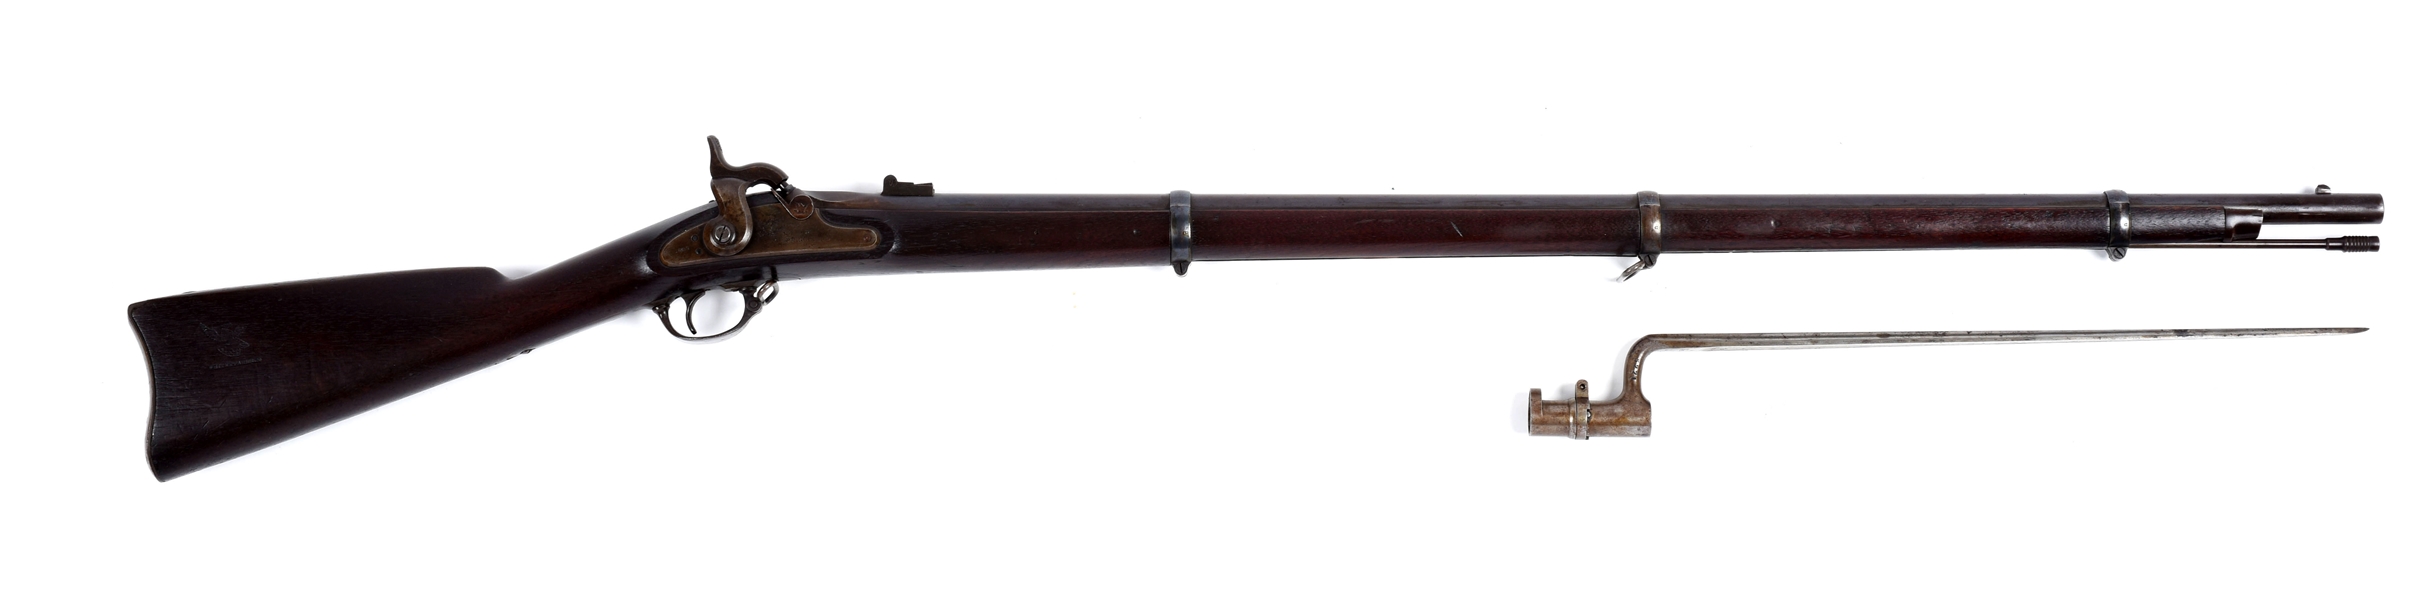 (A) FINE CONDITION WHITNEY U.S. SPRINGFIELD MODEL 1863 PERCUSSION MUSKET WITH BAYONET.